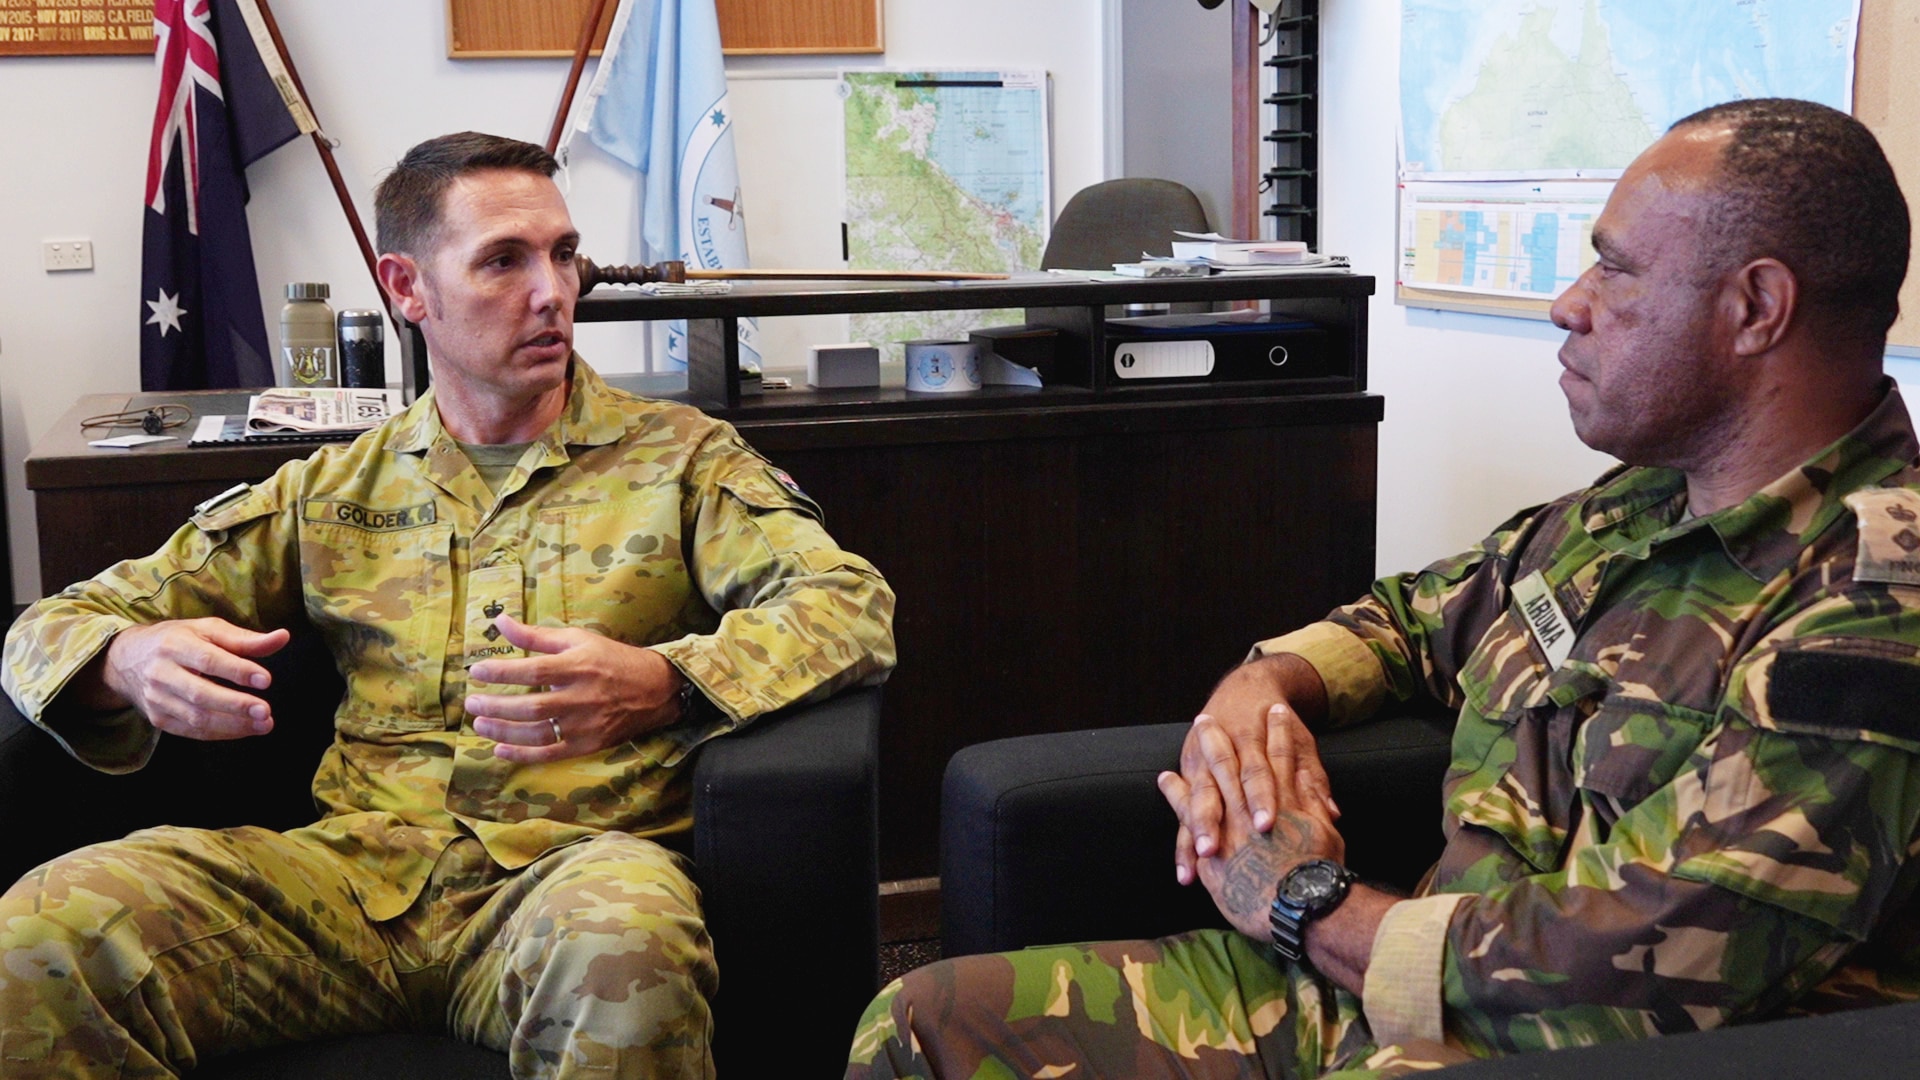 Two defence personnel sit and talk on couches in office.